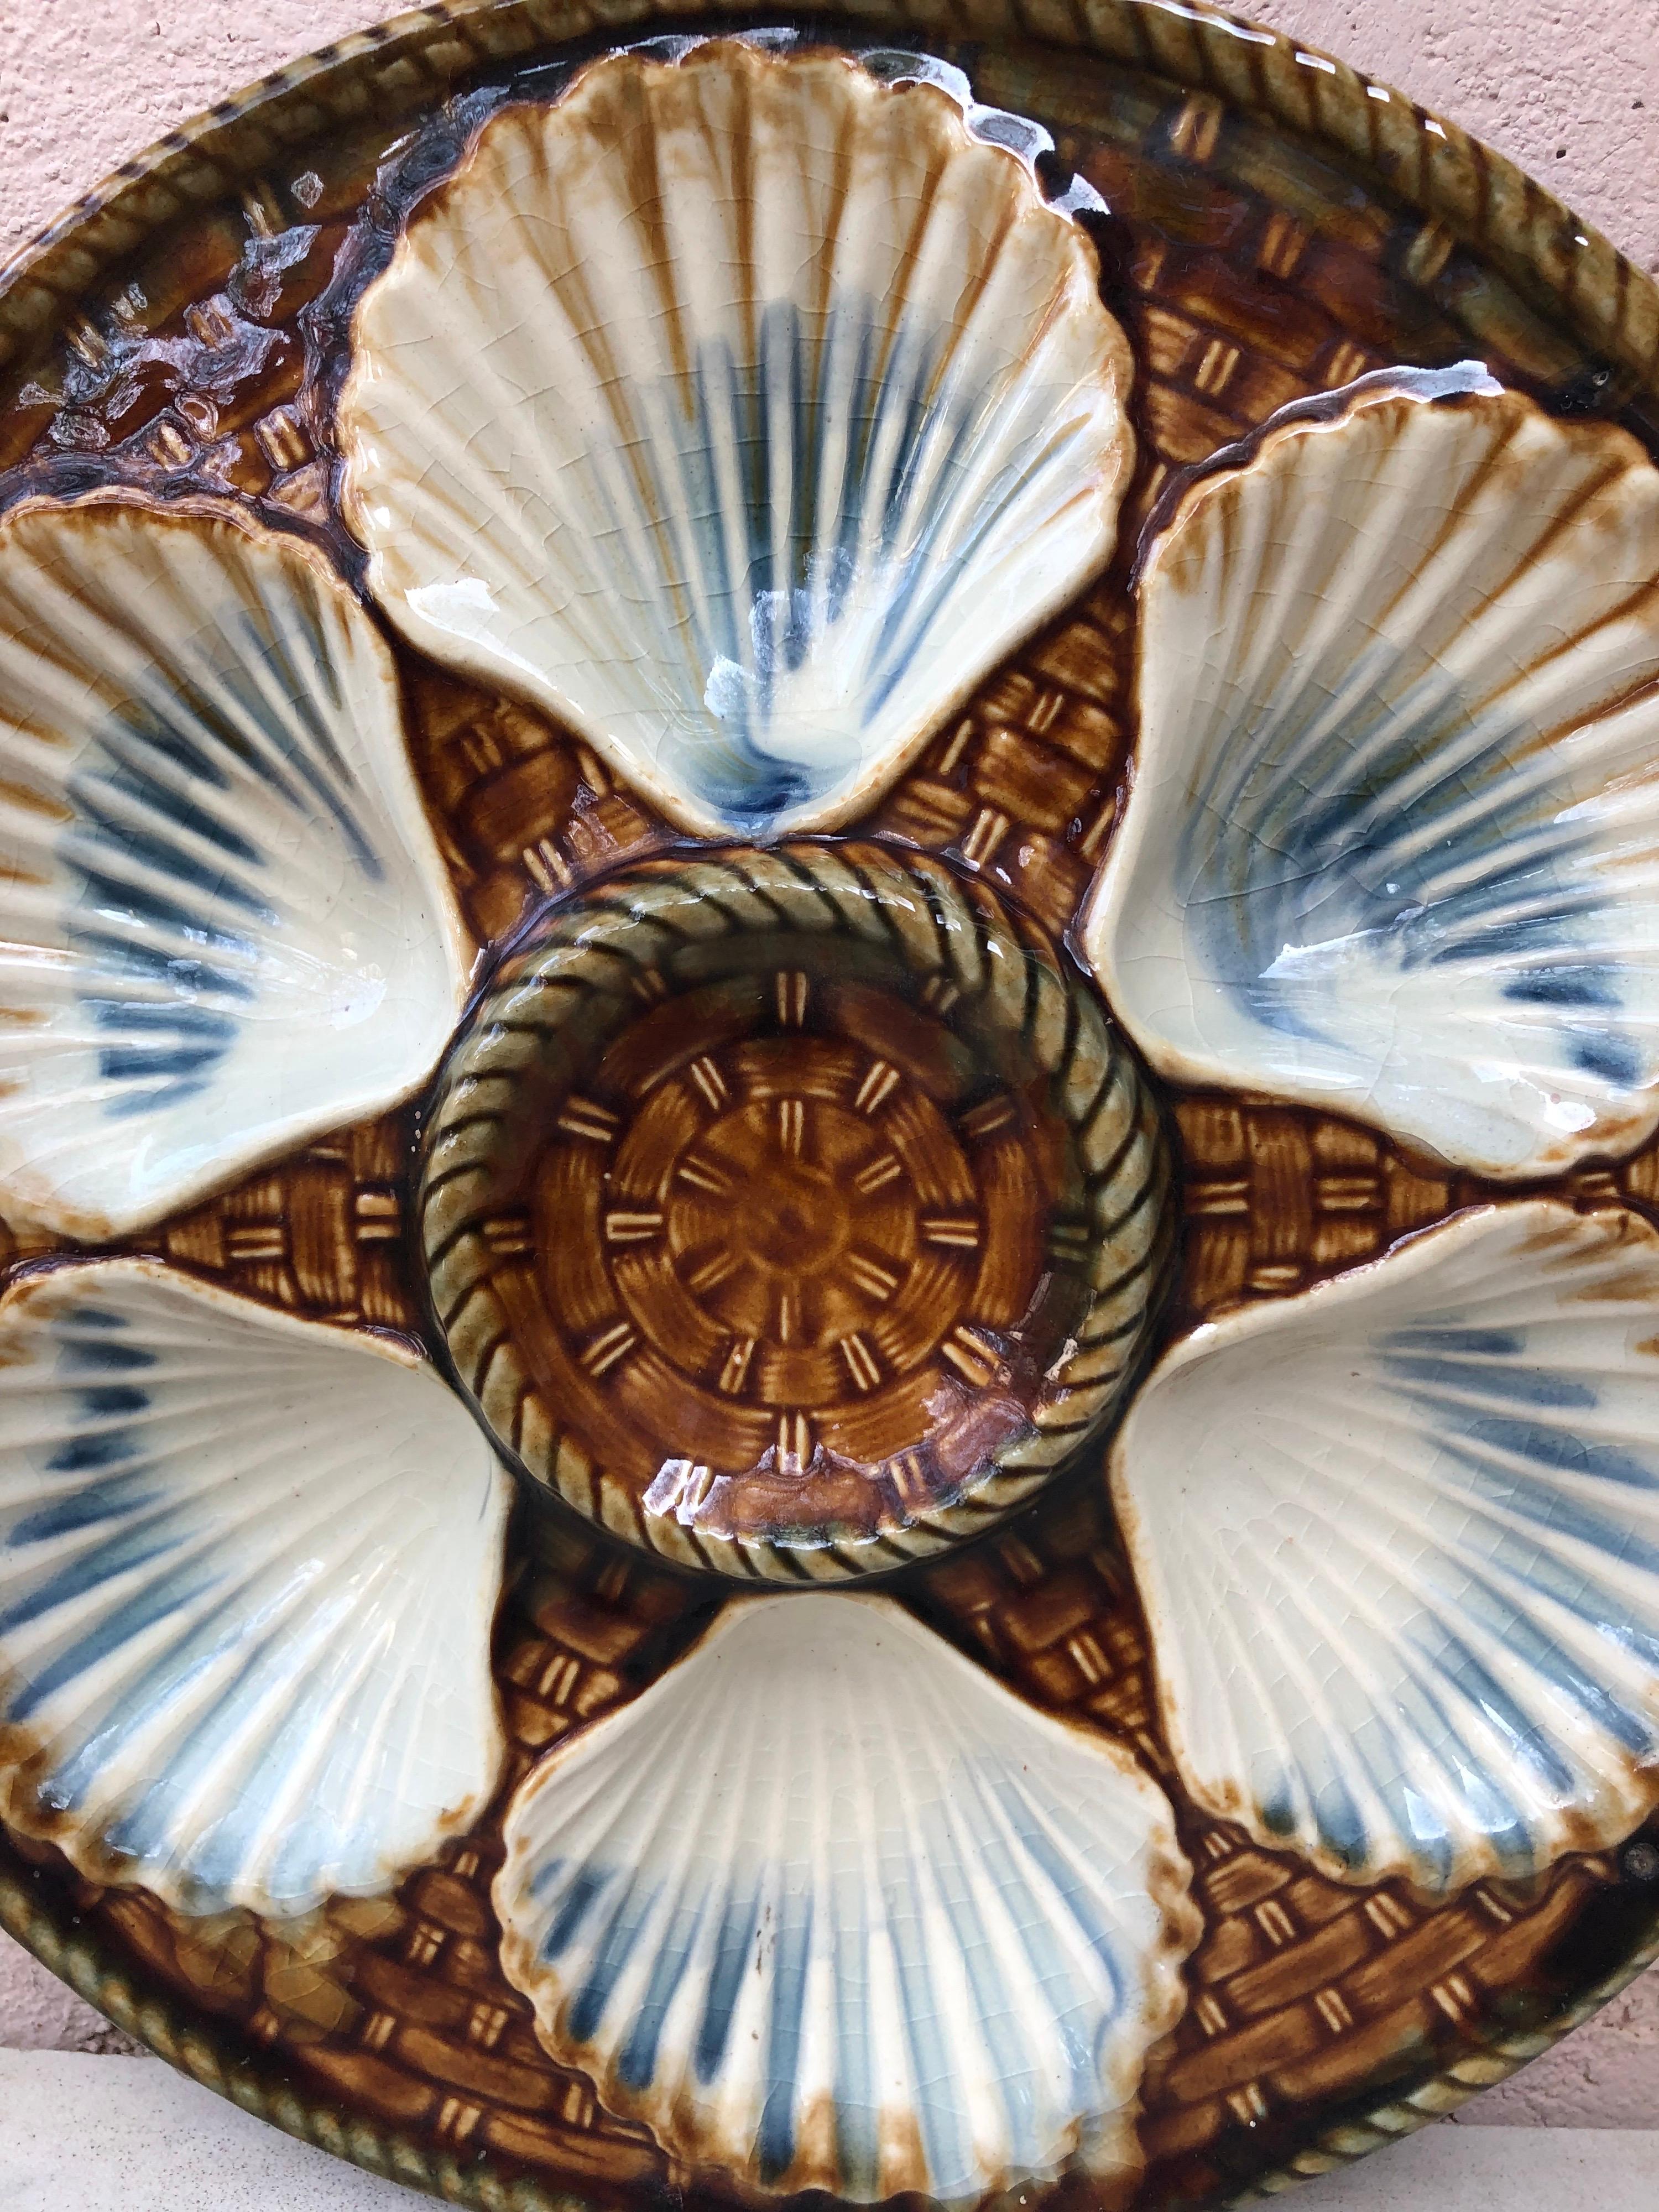 Rare yellow Majolica oyster plate, six white wells on a yellow basket weave, circa 1890 signed Longchamp.